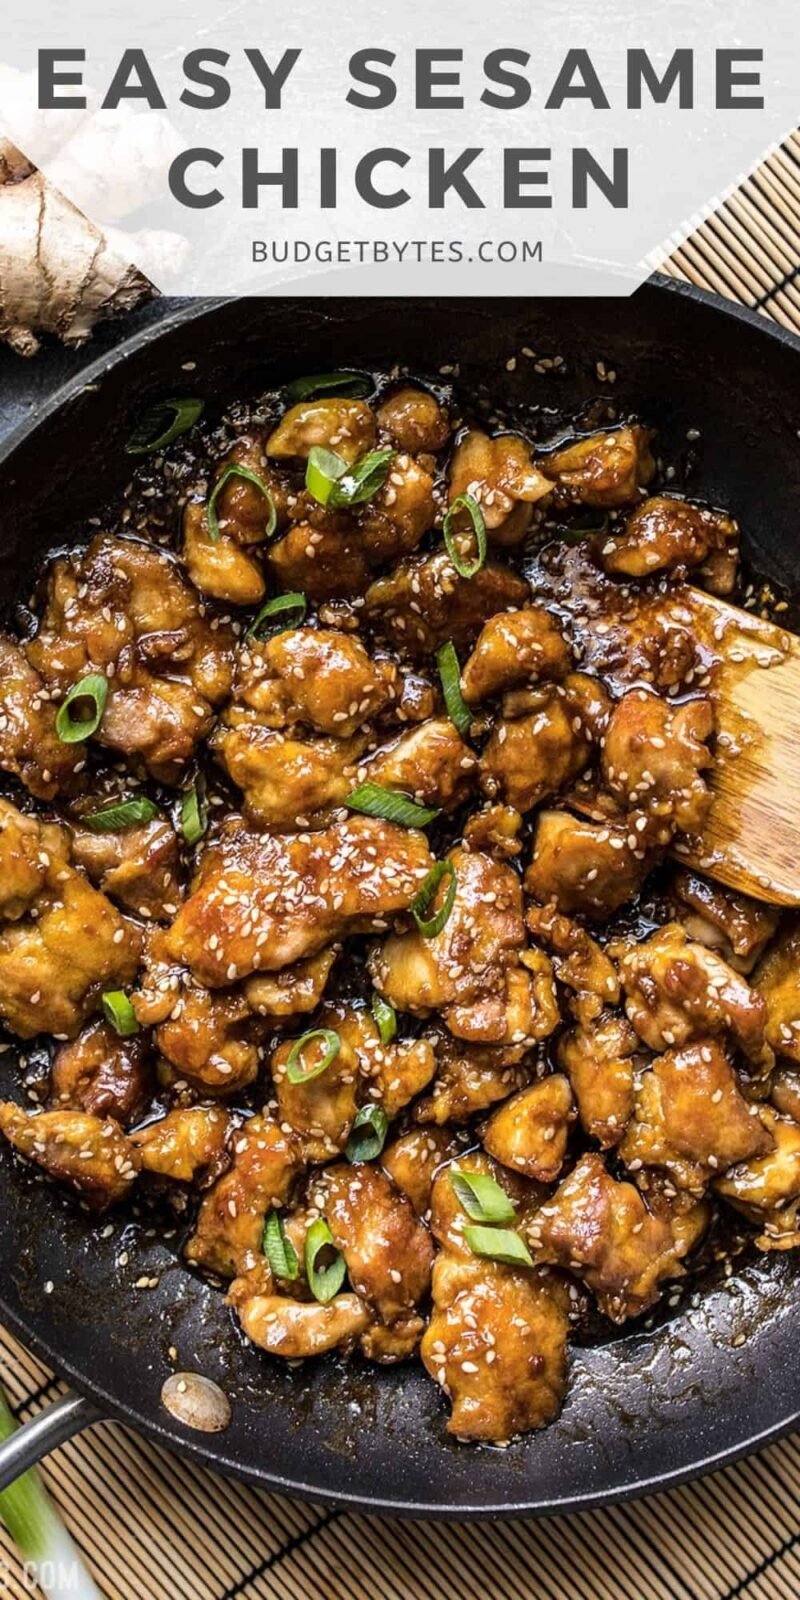 Overhead view of sesame chicken in the skillet, title text at the top